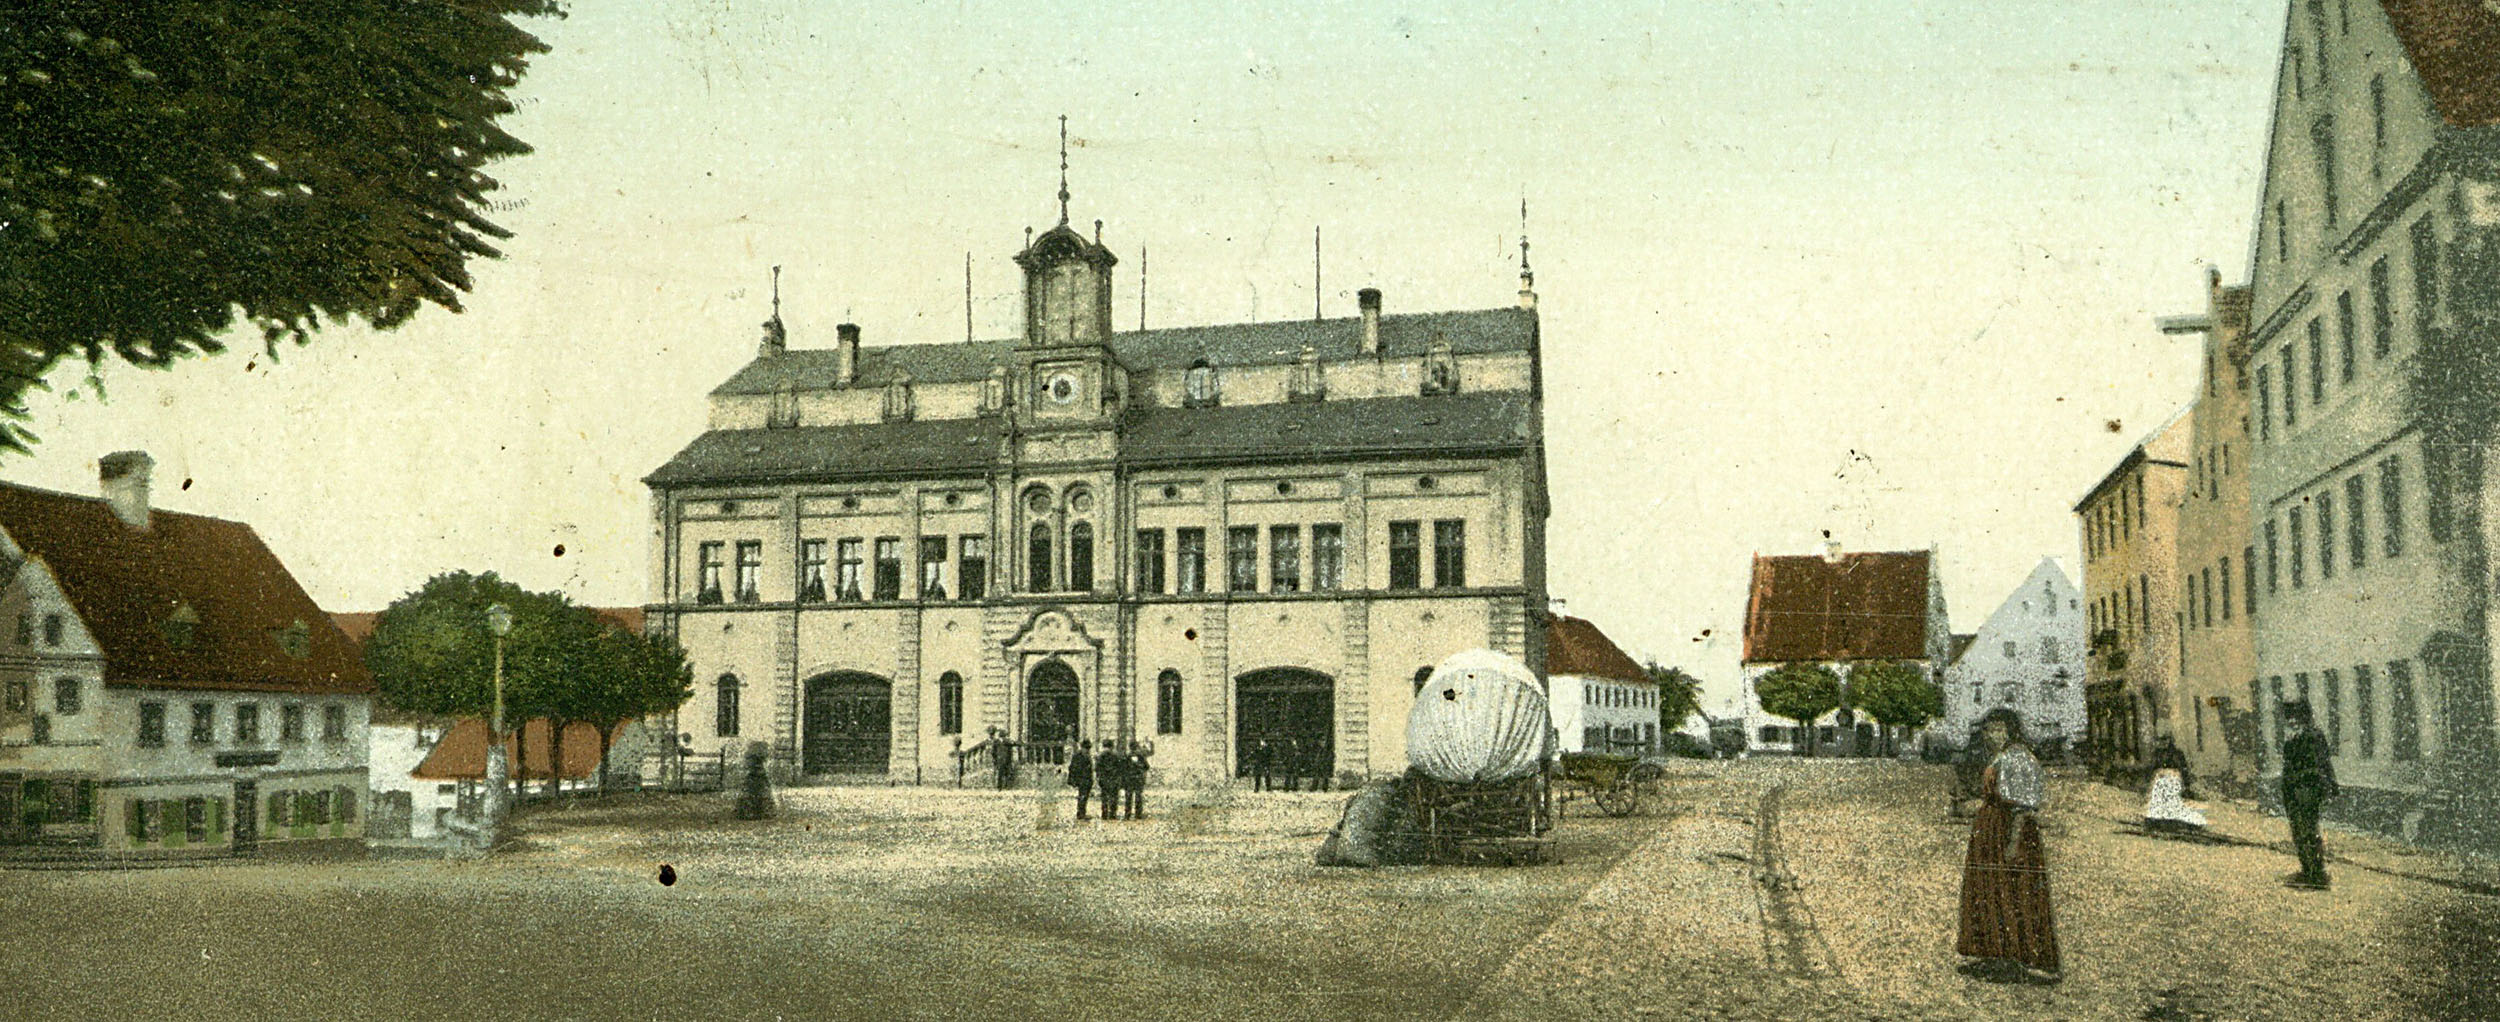 Old view of Wolnzach town hall